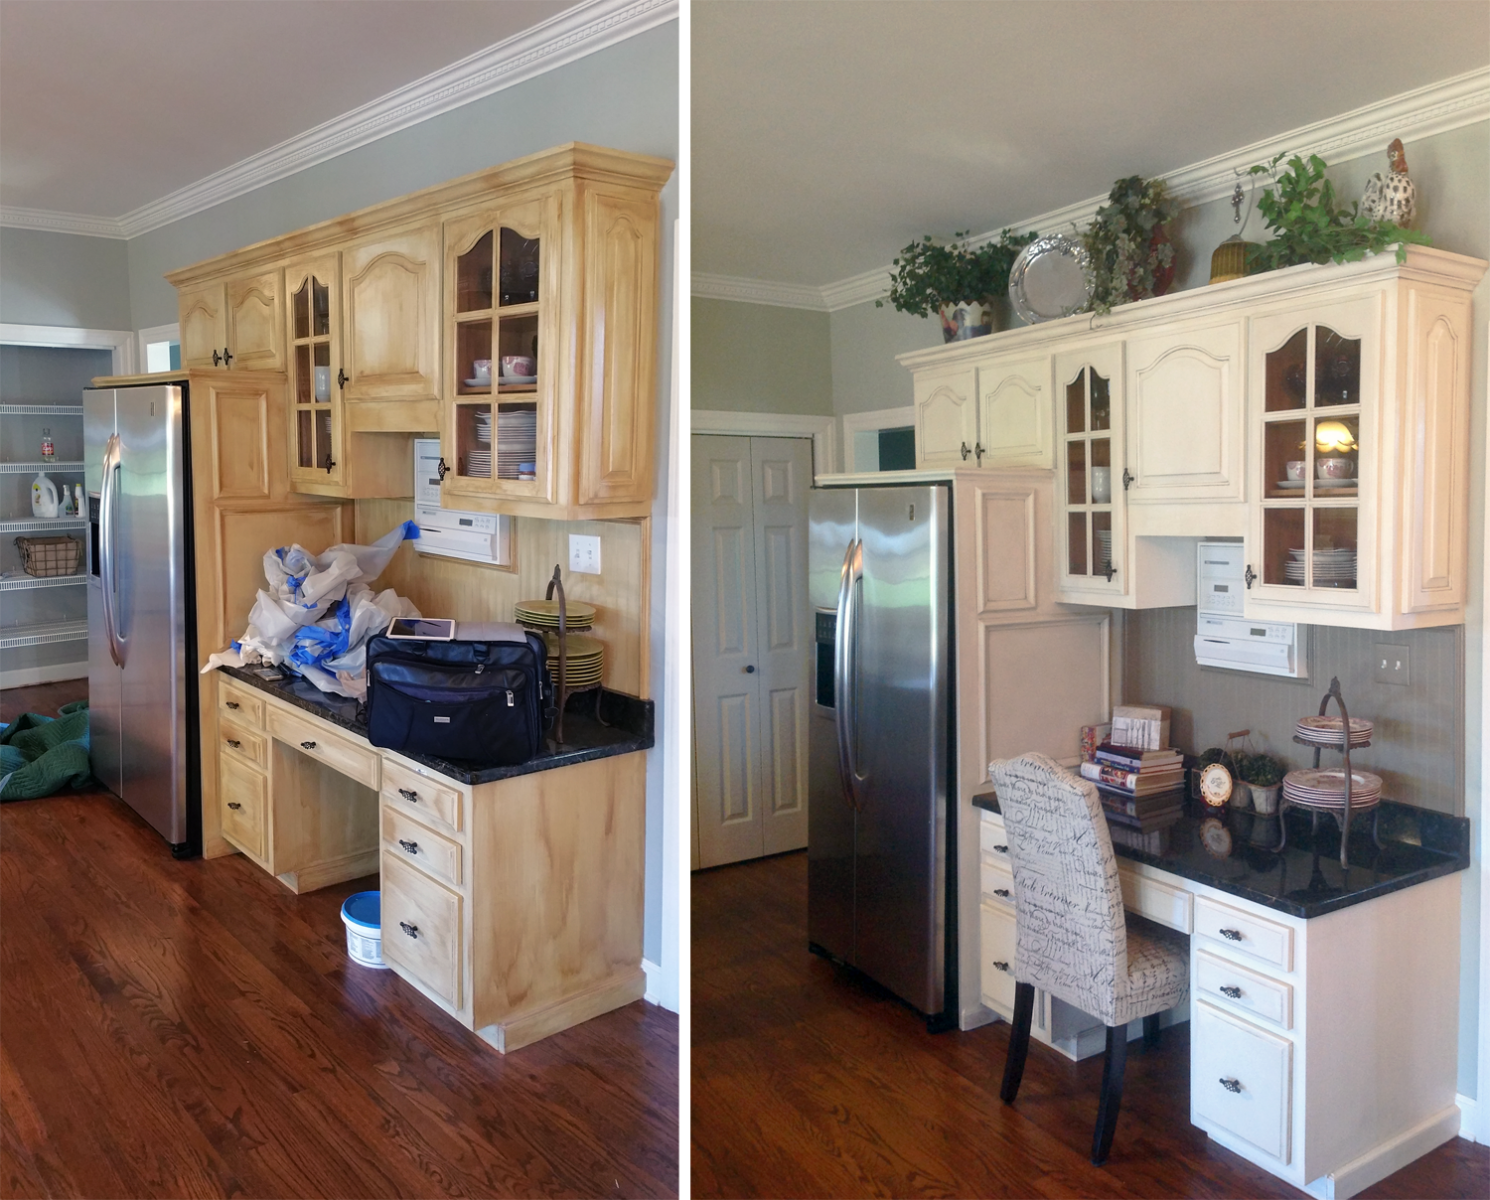 Before and After of this Mount Juliet customer’s kitchen cabinet transformation adding a warm modern Tuscan glaze look on desk area